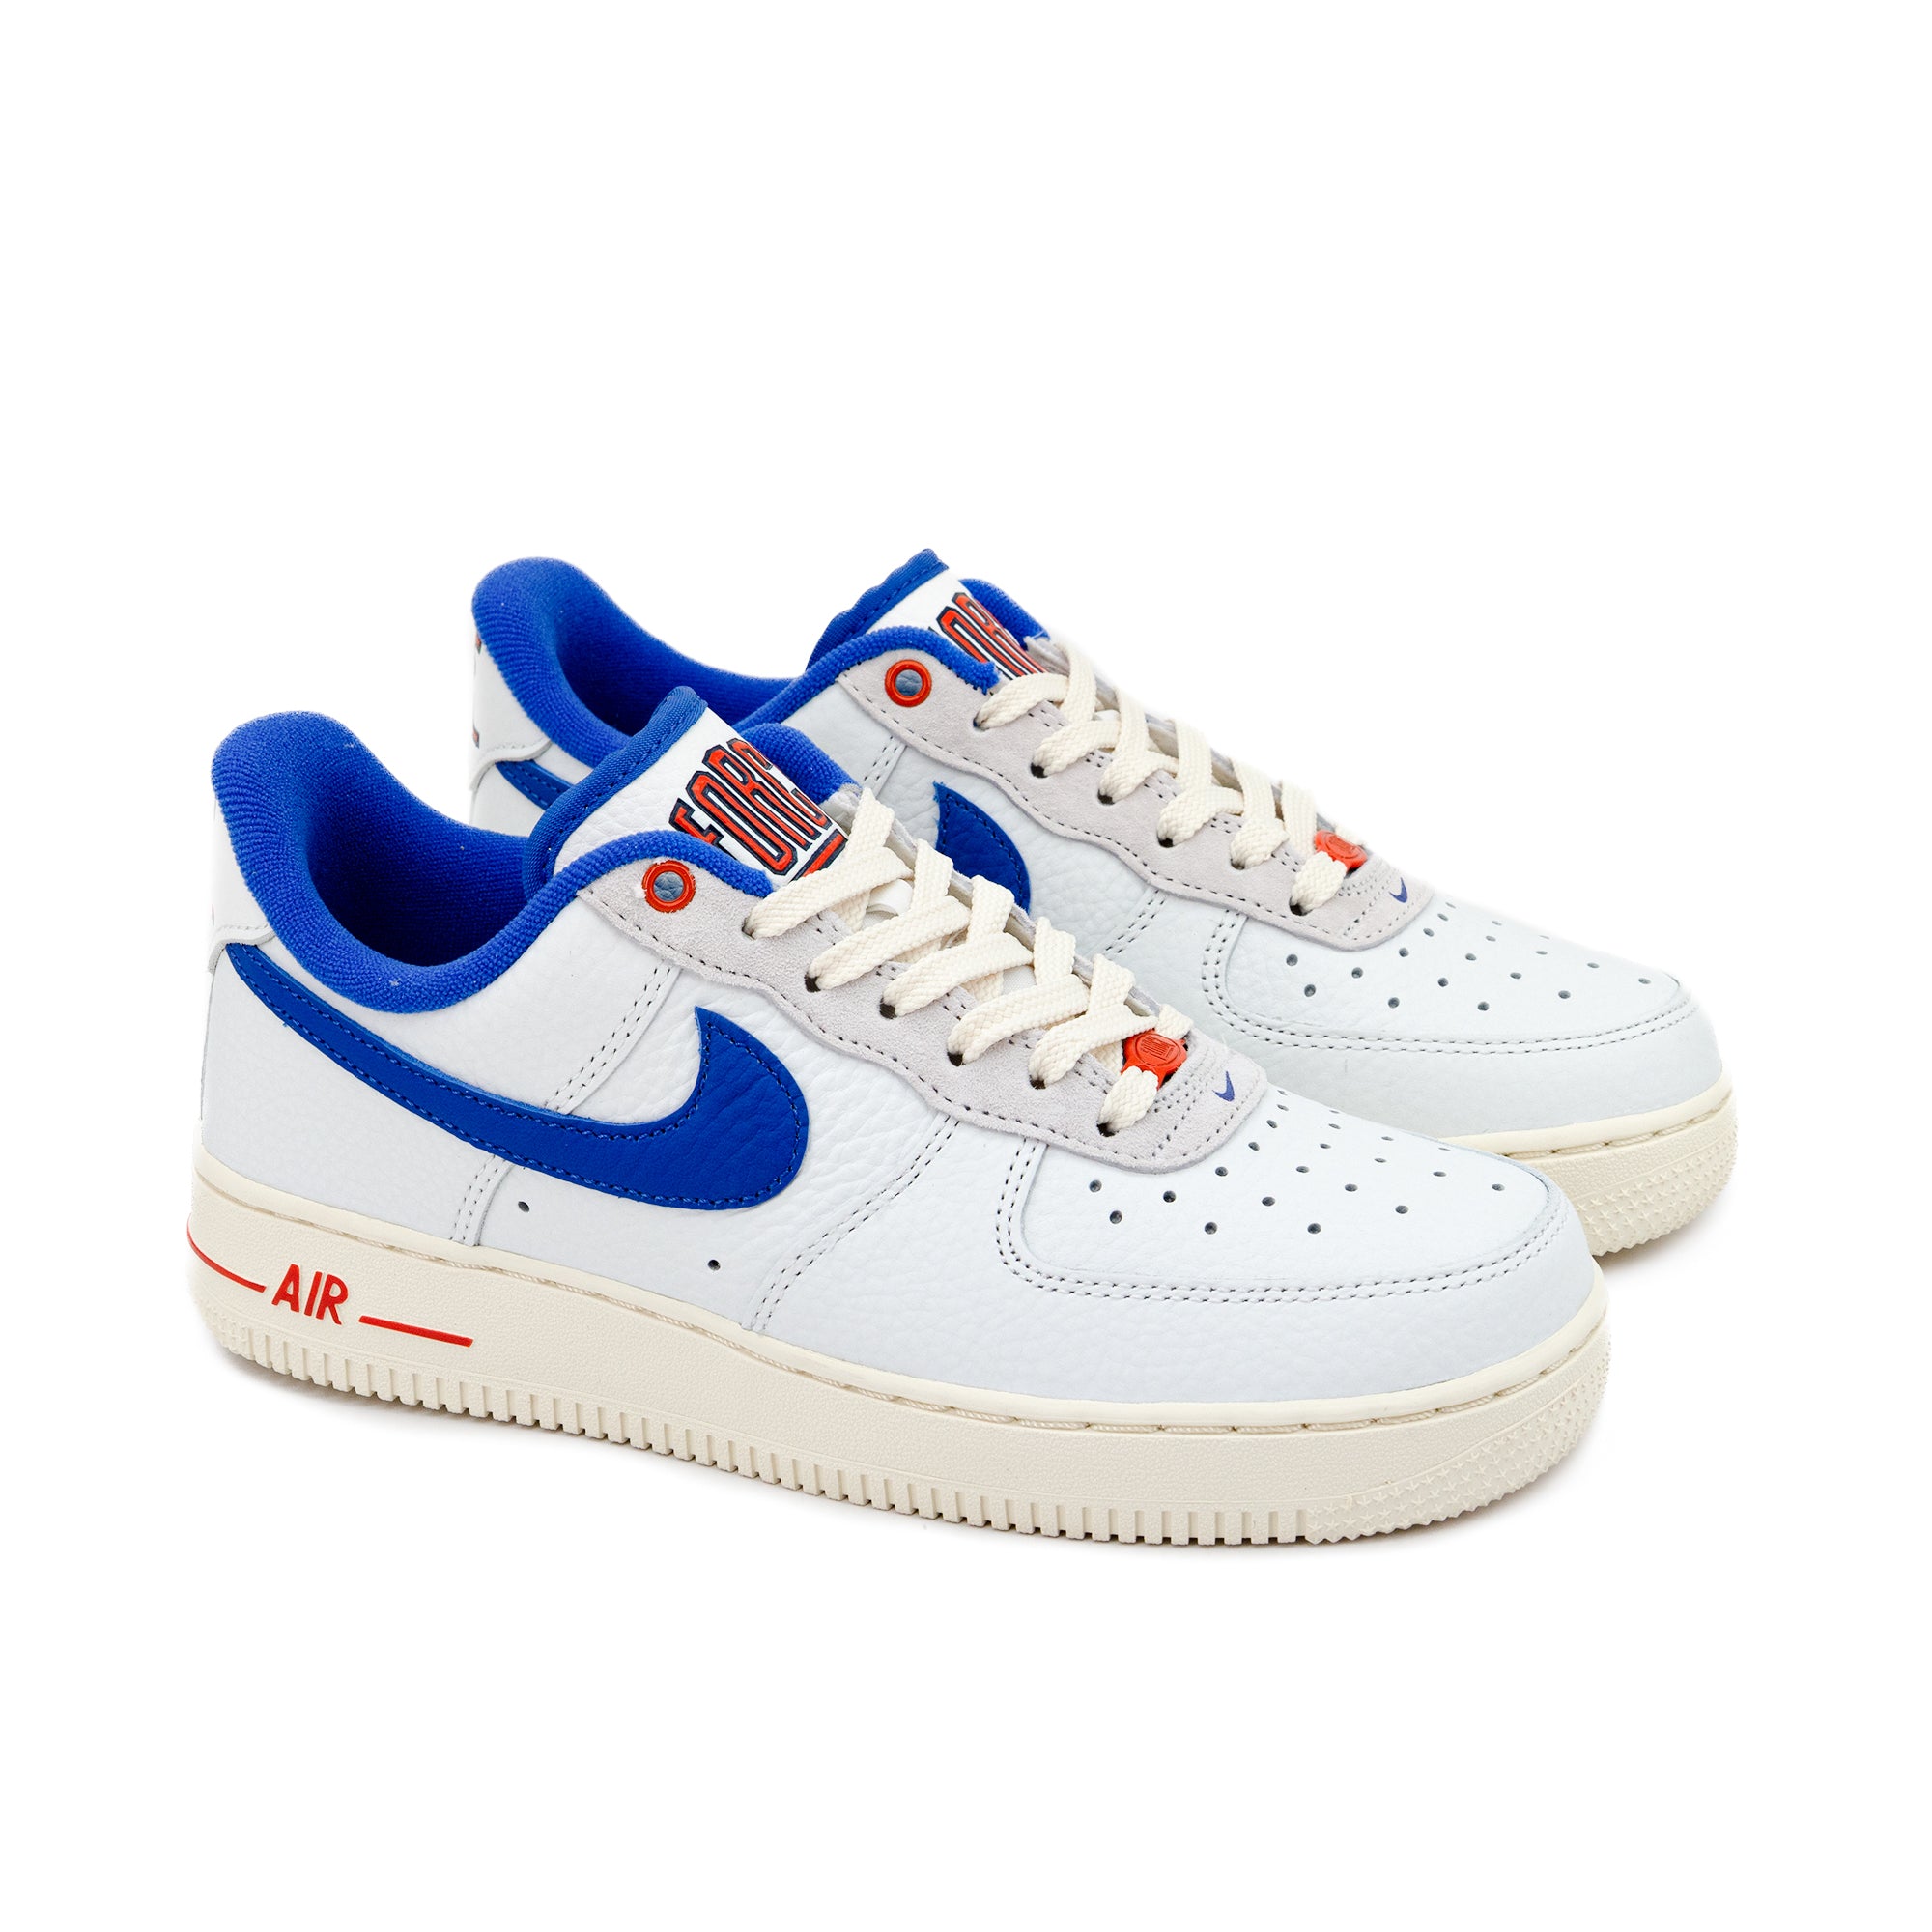 Nike Women's Air Force 1 '07 LX Command Force Low-Top Sneakers